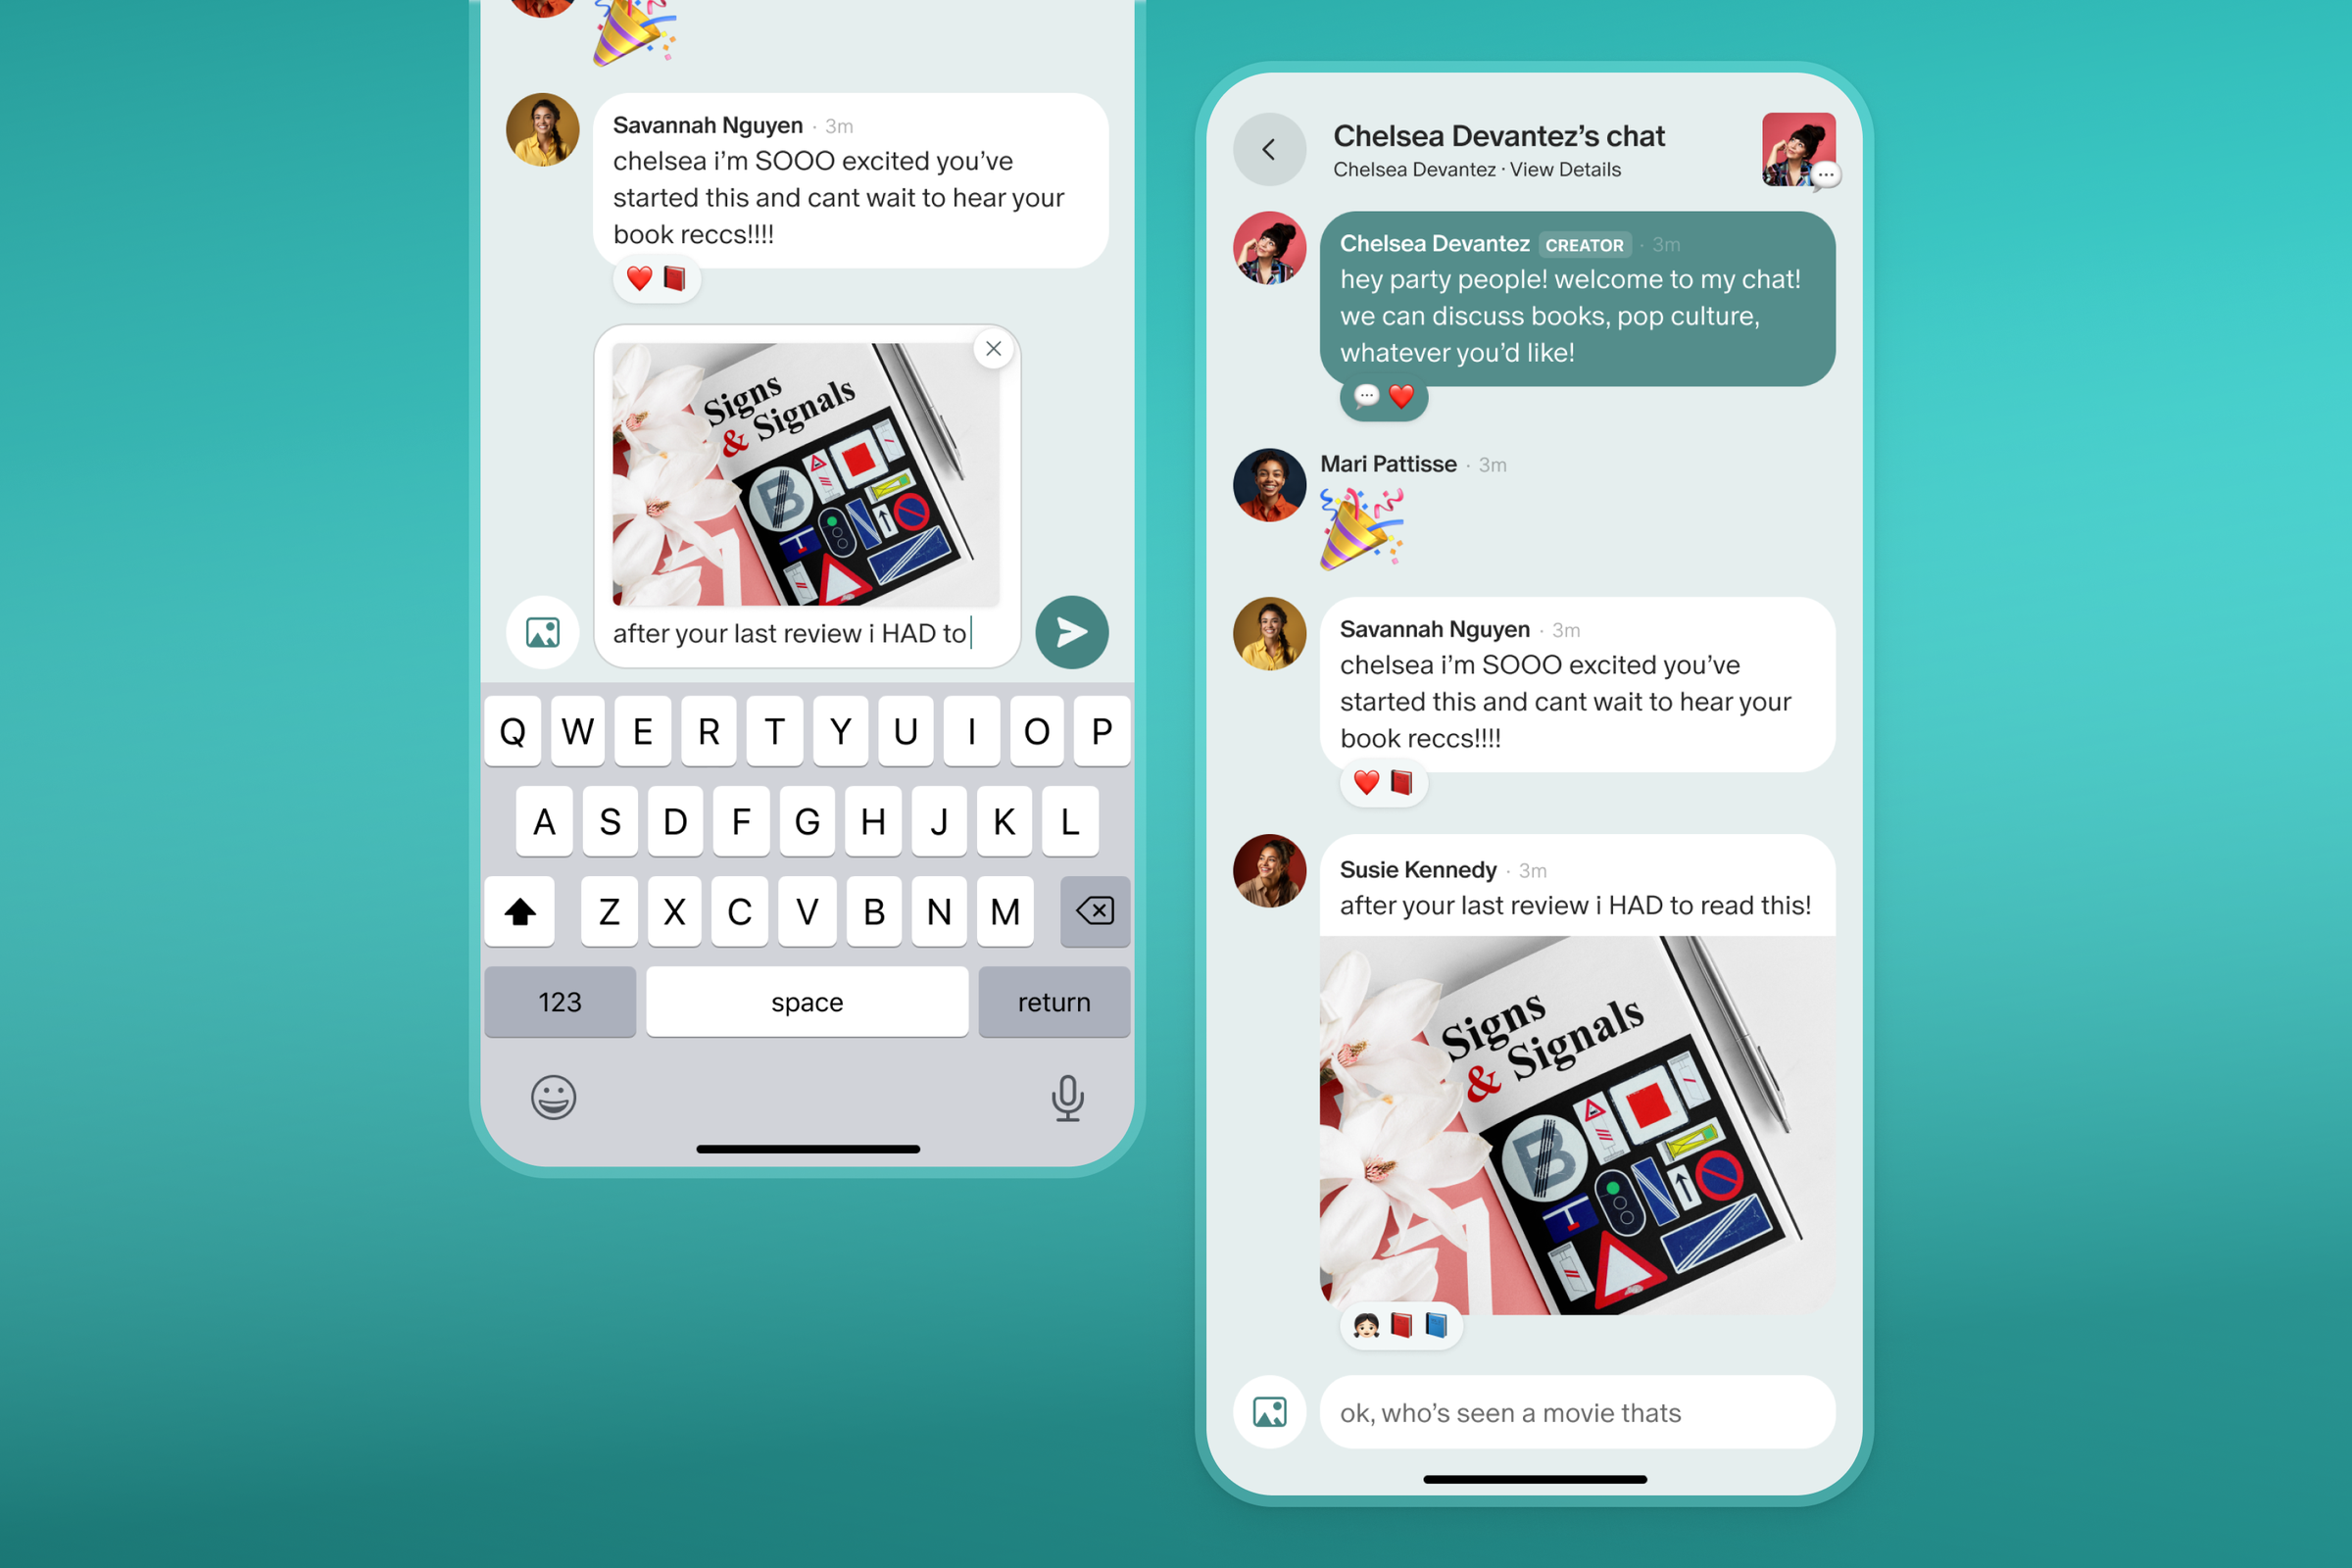 Patreon chat room feature with text and image messages, plus emoji reactions.